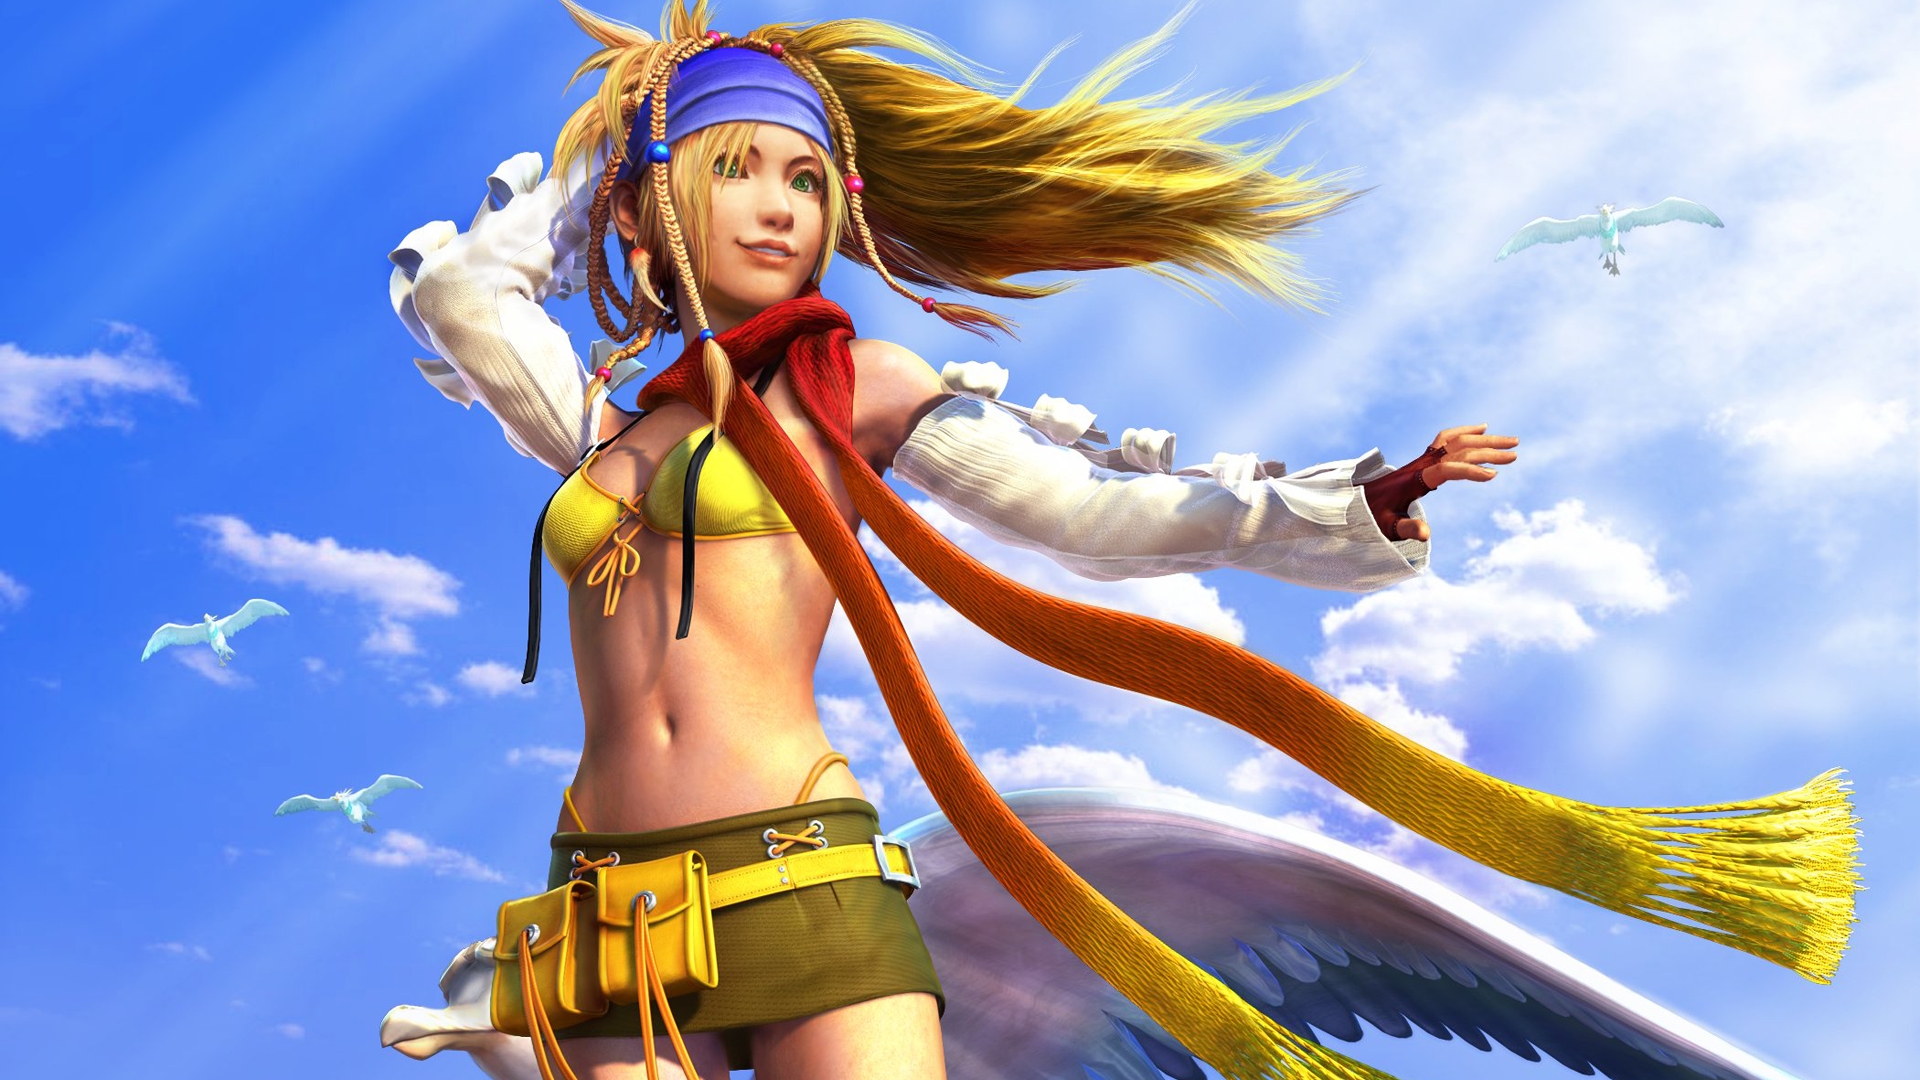 Video Game Final Fantasy X 2 Wallpapers 